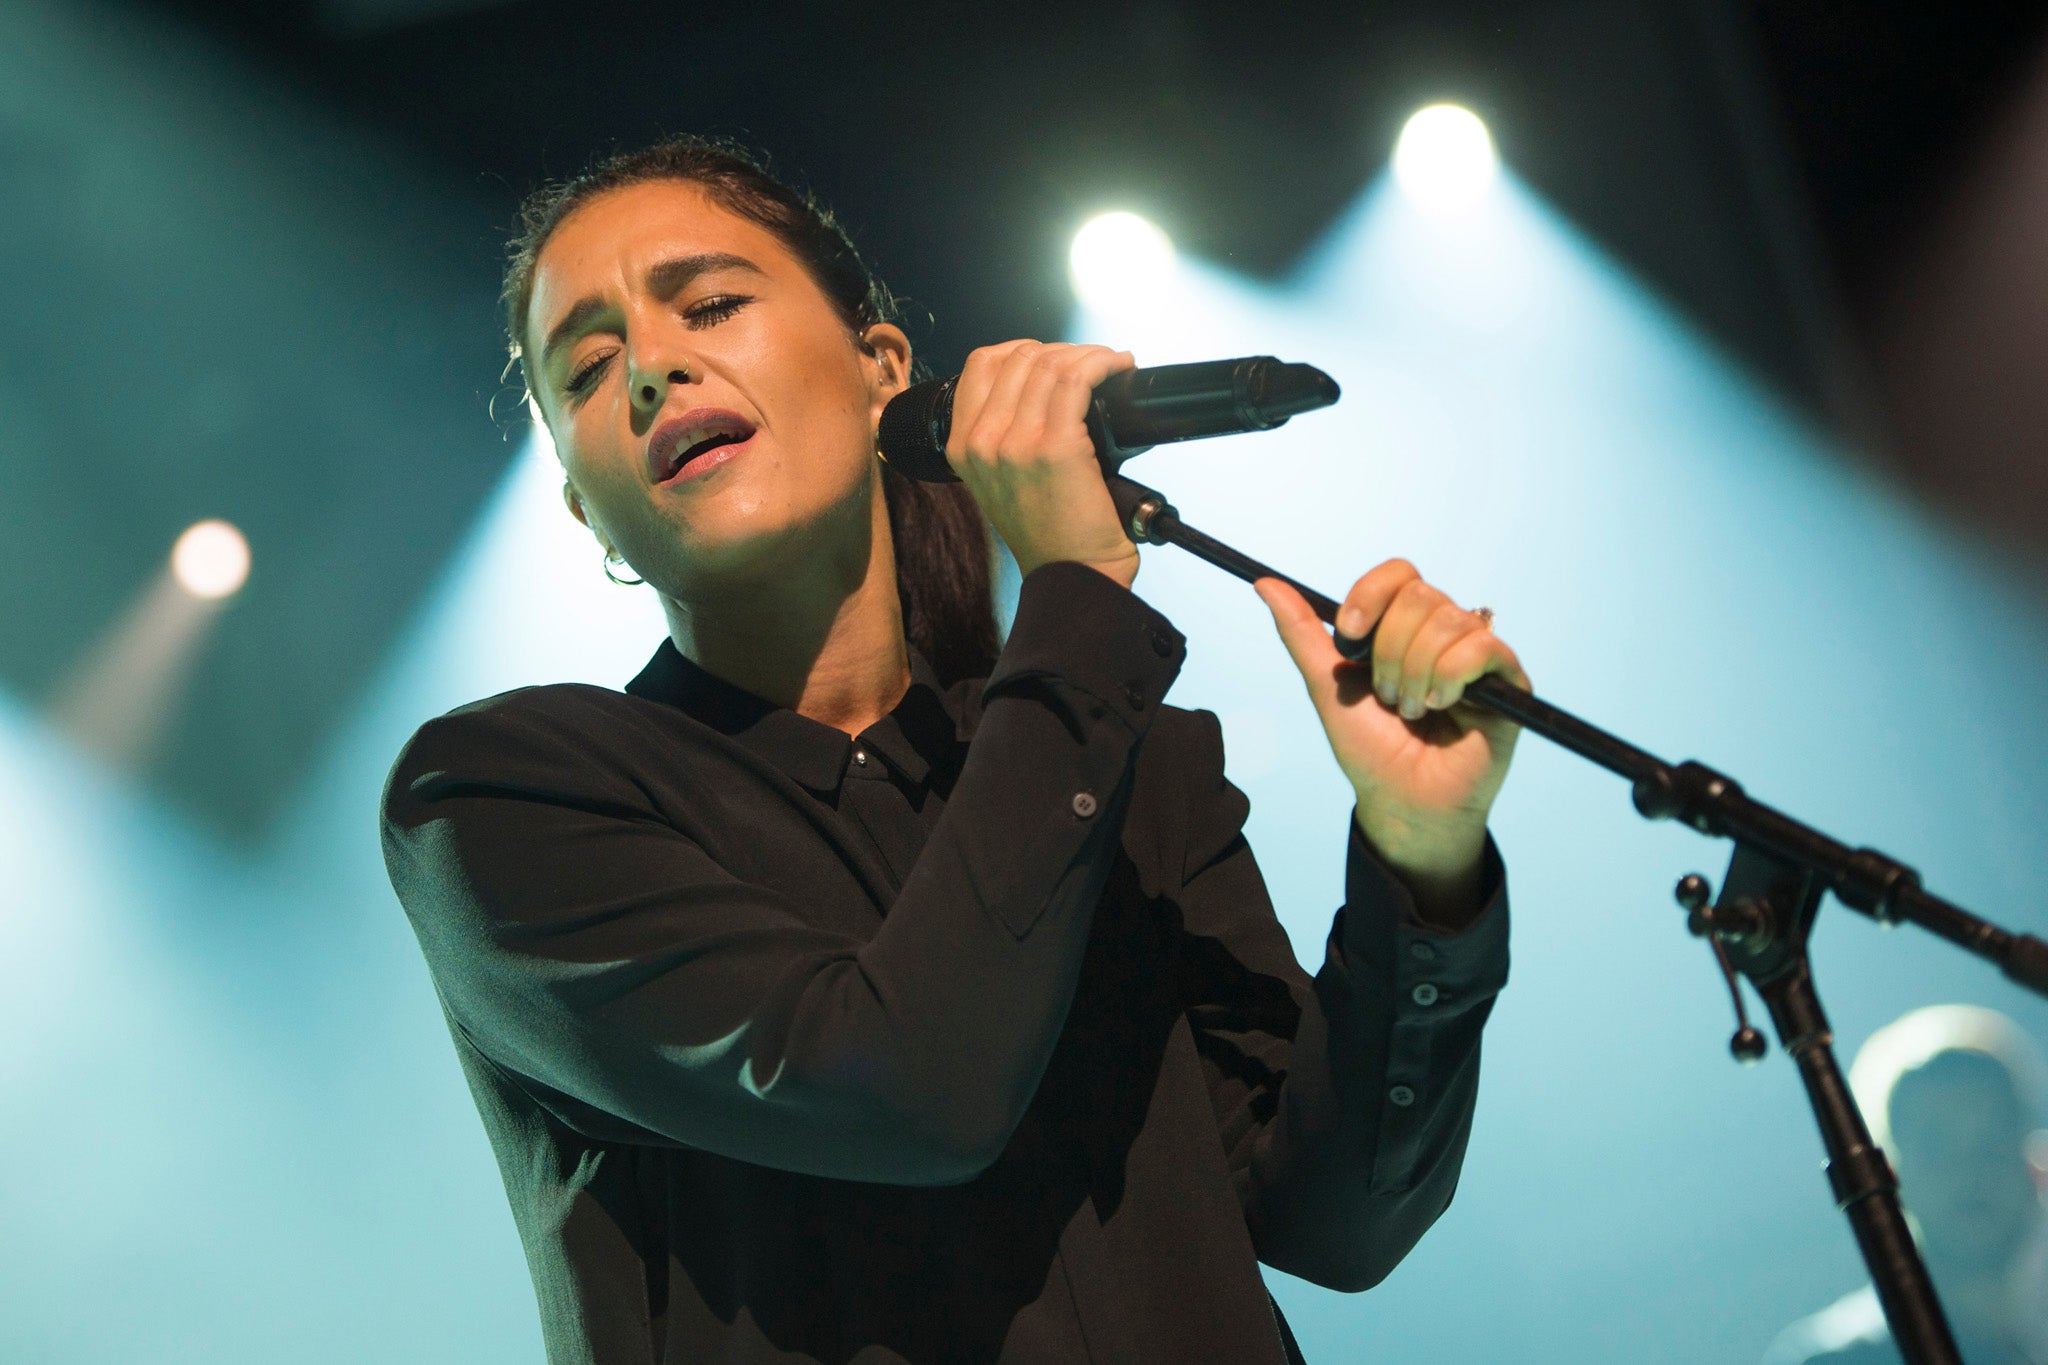 Jessie Ware performs at the Roundhouse as part of the iTunes Festival 2014